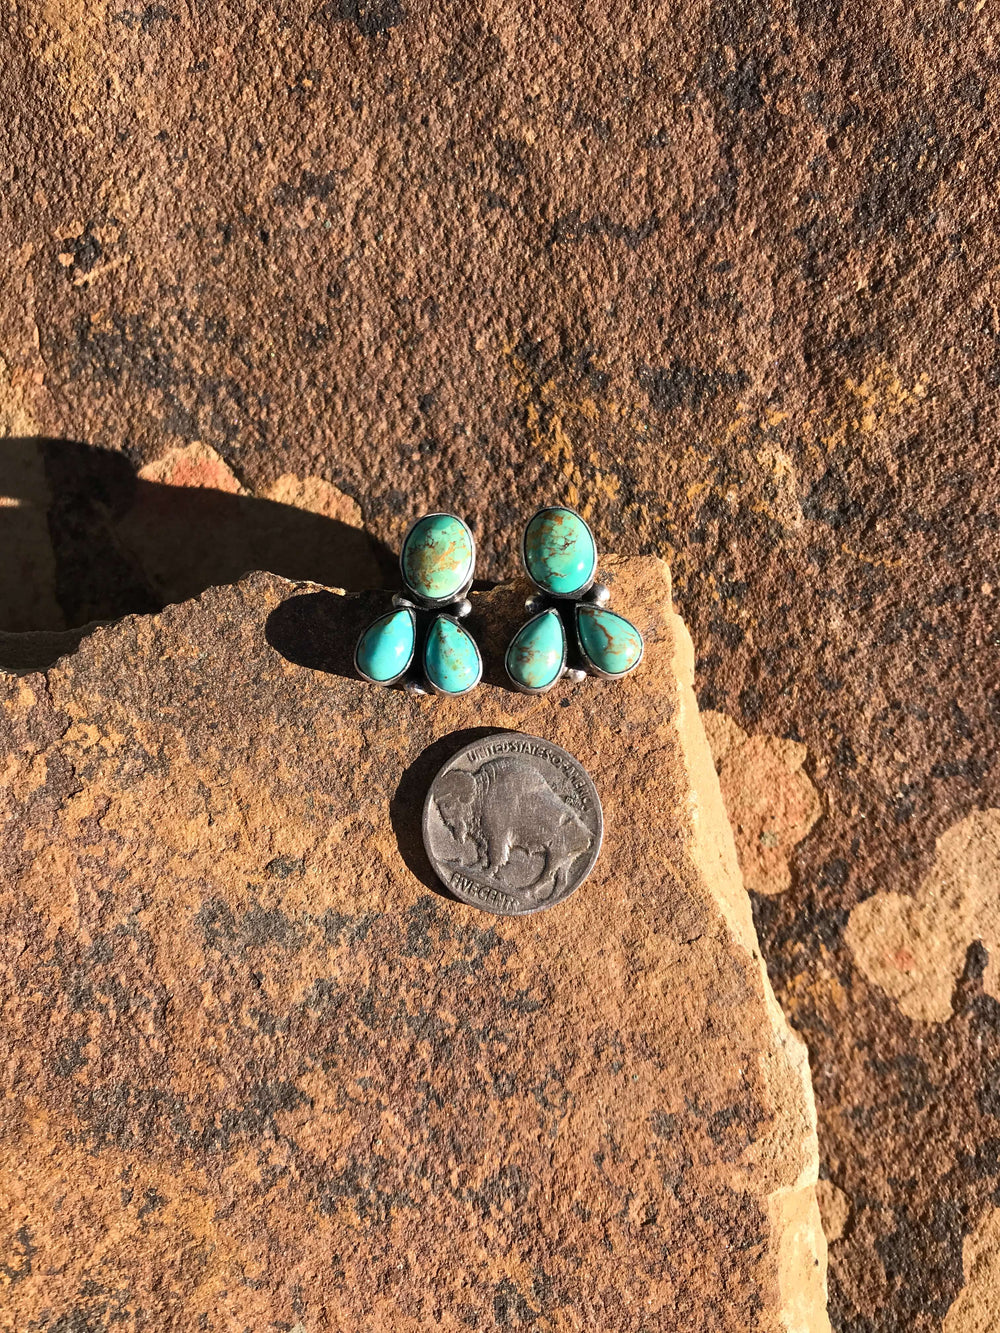 The Journey West Earrings, 5-Earrings-Calli Co., Turquoise and Silver Jewelry, Native American Handmade, Zuni Tribe, Navajo Tribe, Brock Texas